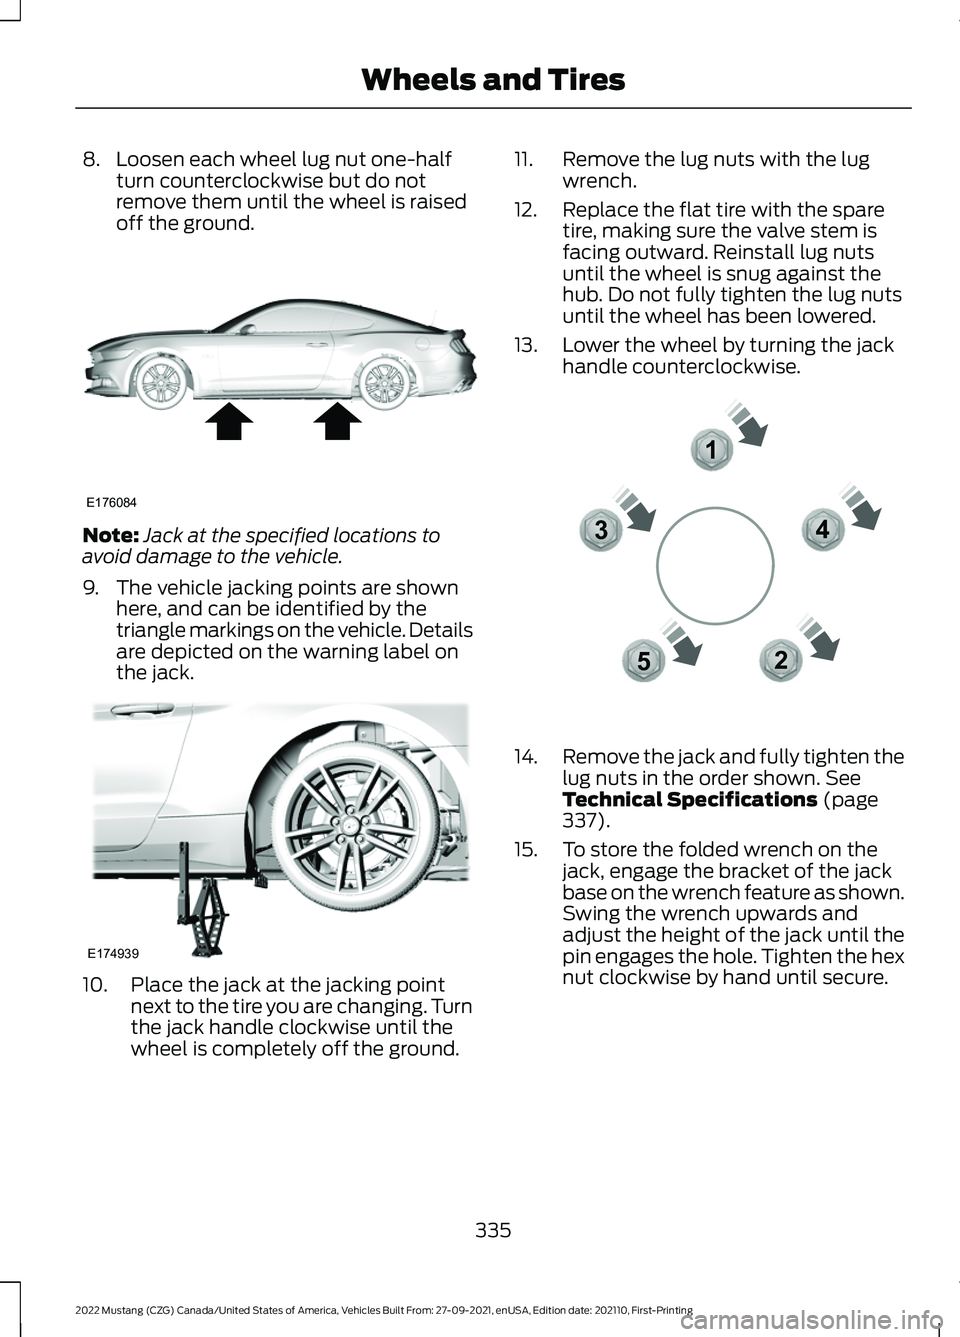 FORD MUSTANG 2022  Owners Manual 8. Loosen each wheel lug nut one-half
turn counterclockwise but do not
remove them until the wheel is raised
off the ground. Note:
Jack at the specified locations to
avoid damage to the vehicle.
9. Th